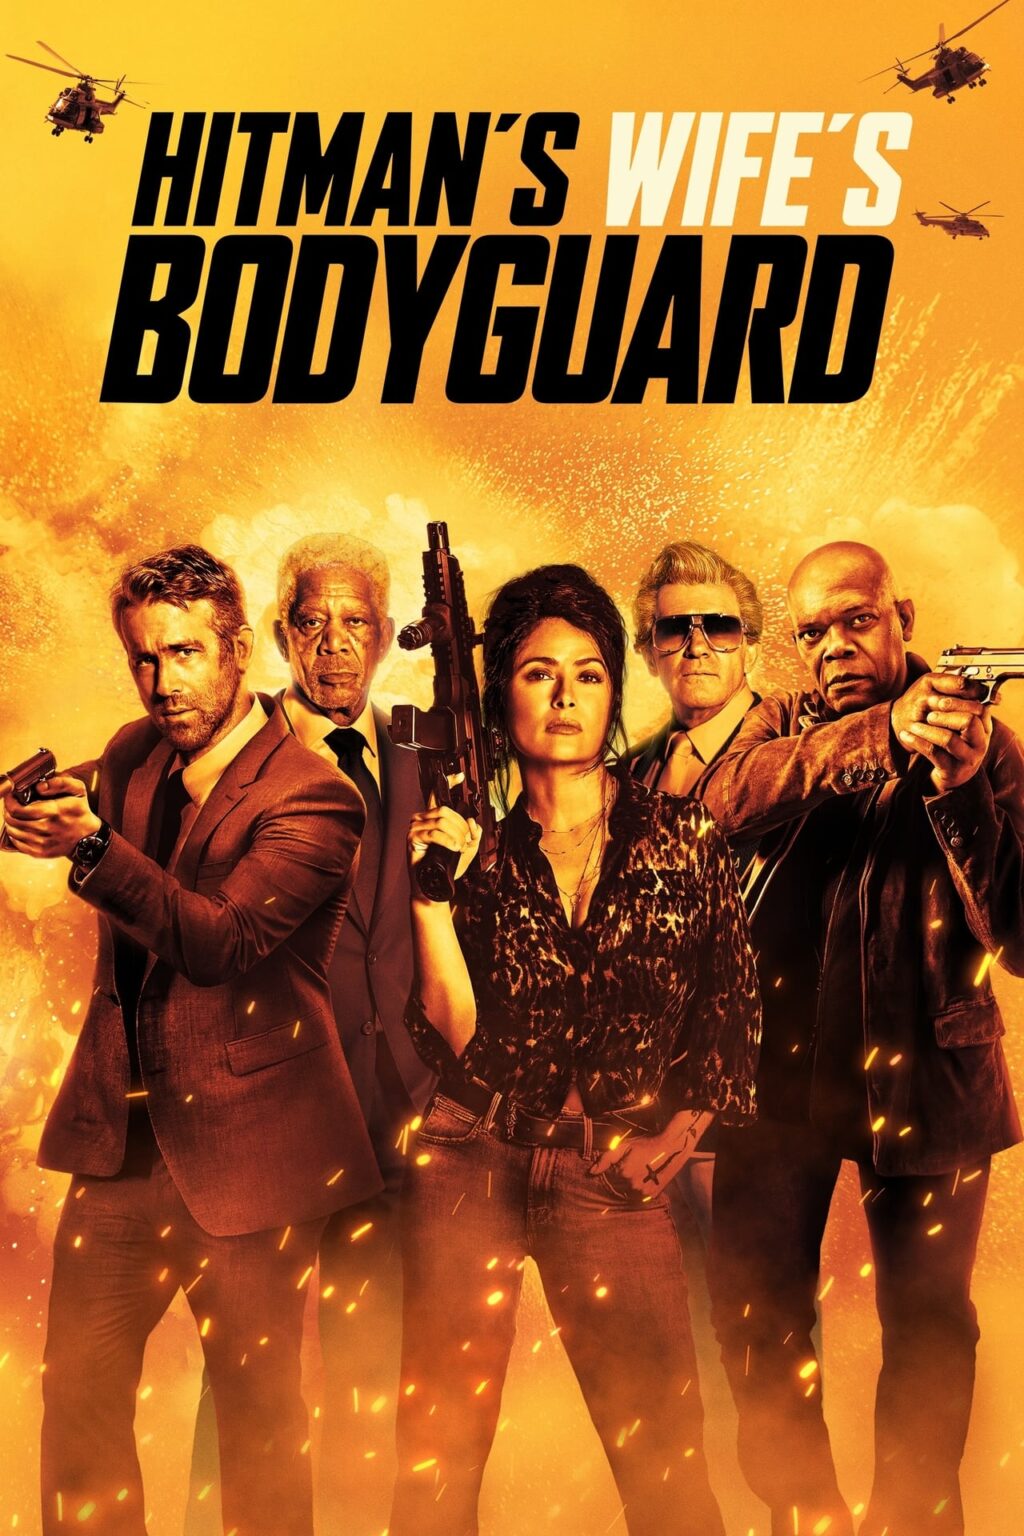 the hitman's wife's bodyguard movie review